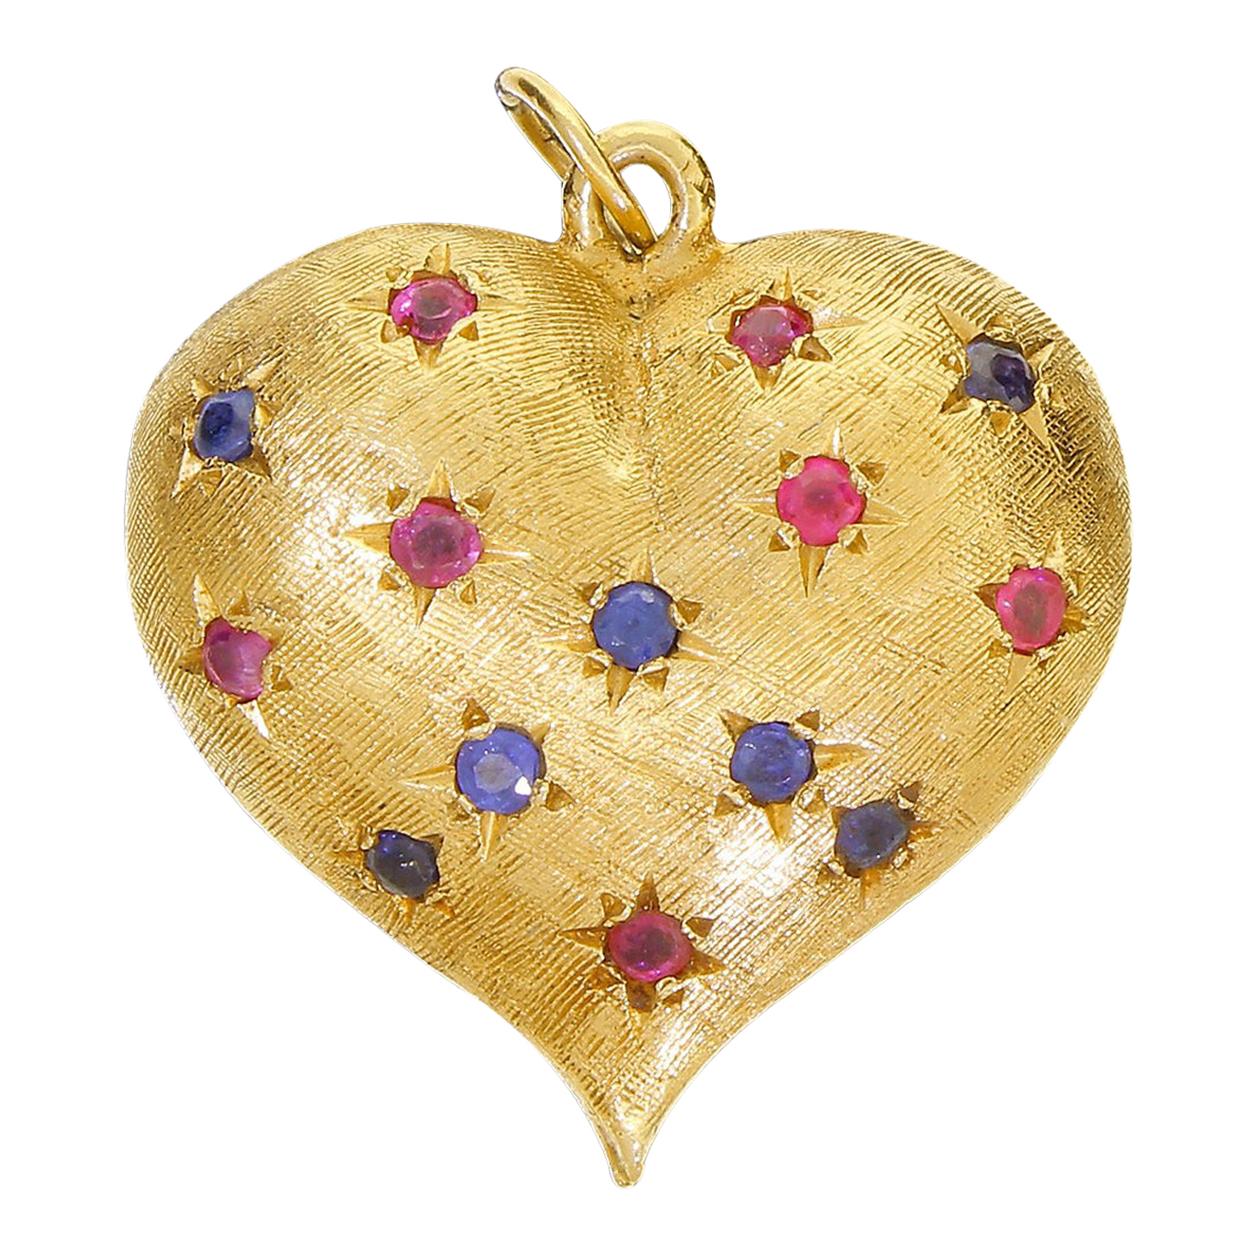 Heavy 14 Karat Gold Love Heart Pendant or Large Charm Red Ruby and Sapphire